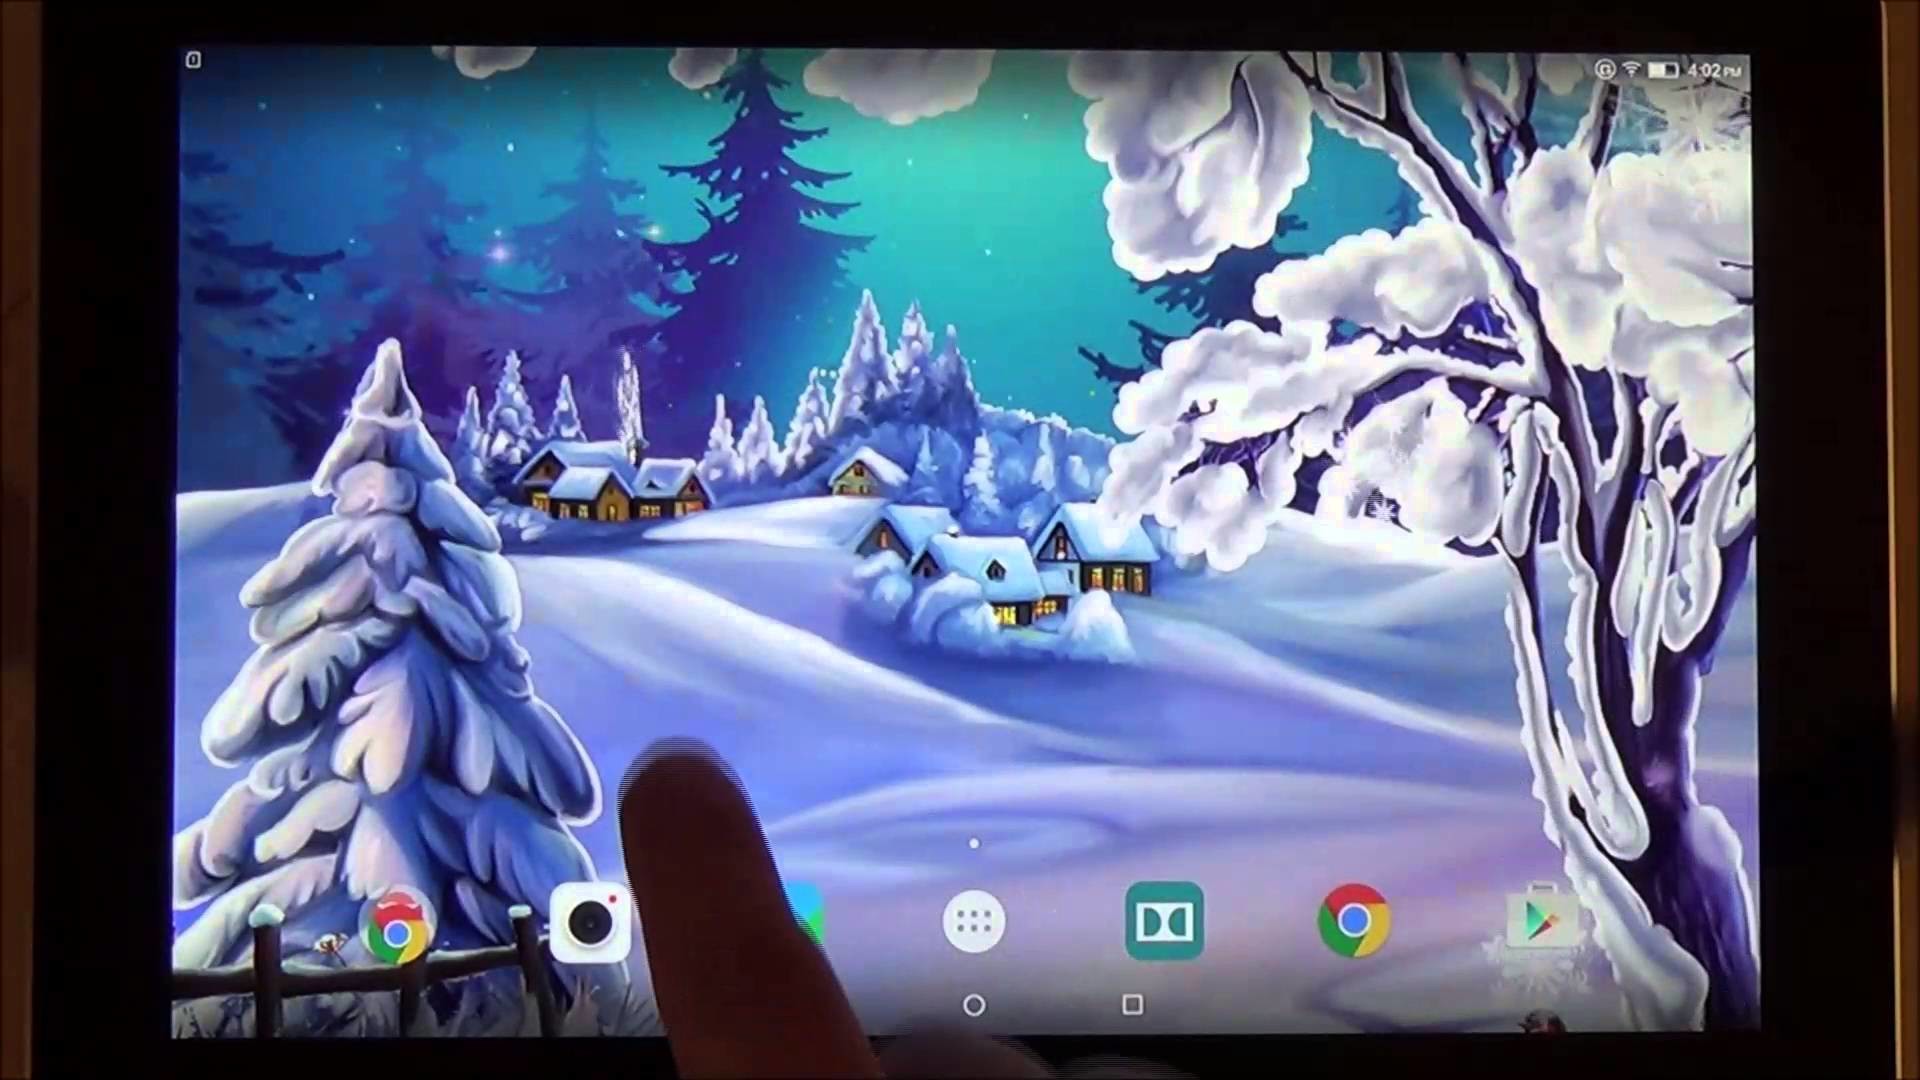 1920x1080 Winter landscape live wallpaper for Android phones and tablets - YouTube